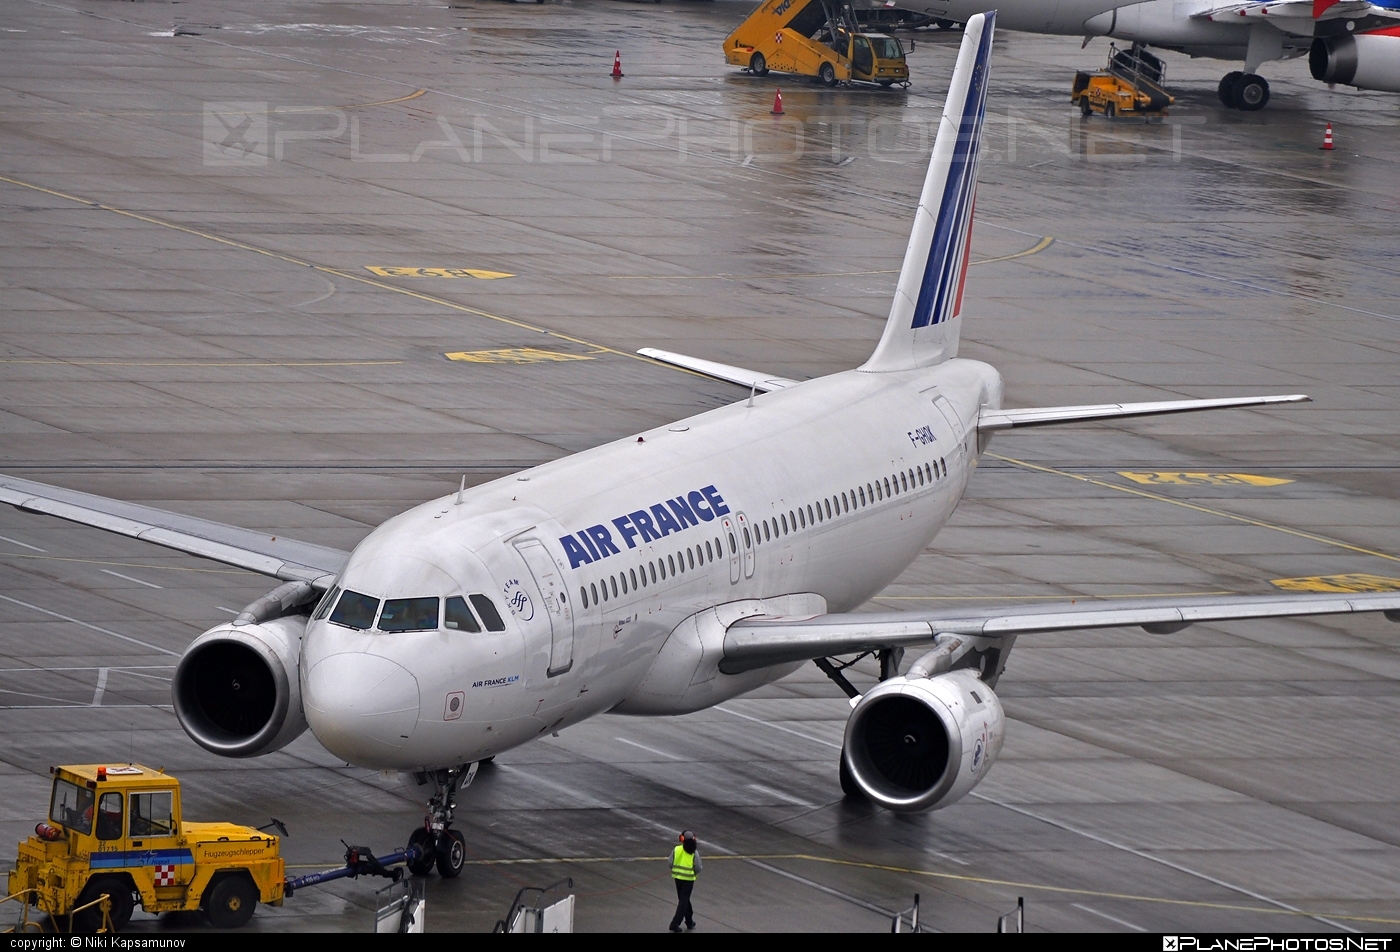 Airbus A320-211 - F-GHQK operated by Air France #a320 #a320family #airbus #airbus320 #airfrance